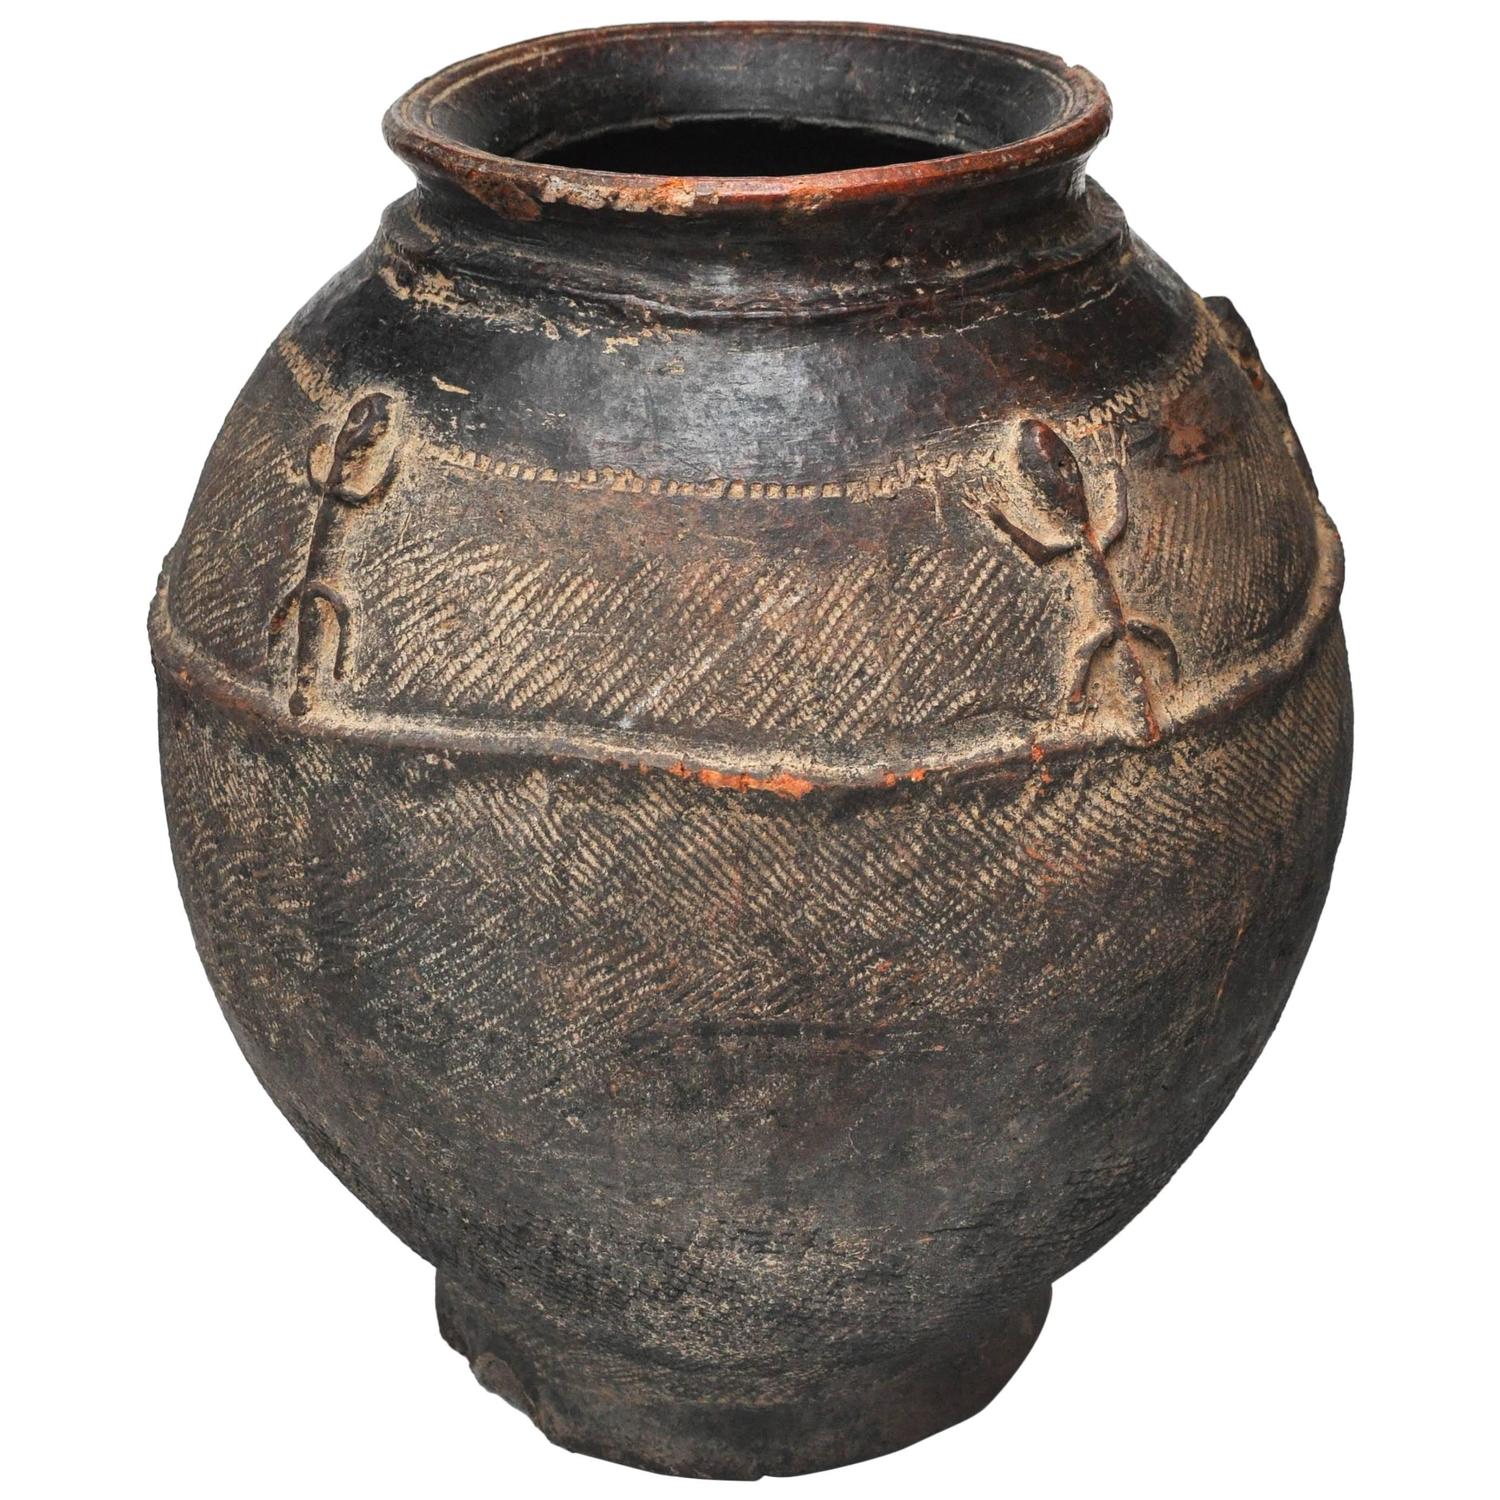 19th Century African Red Clay Water Pot from Mali For Sale at 1stdibs